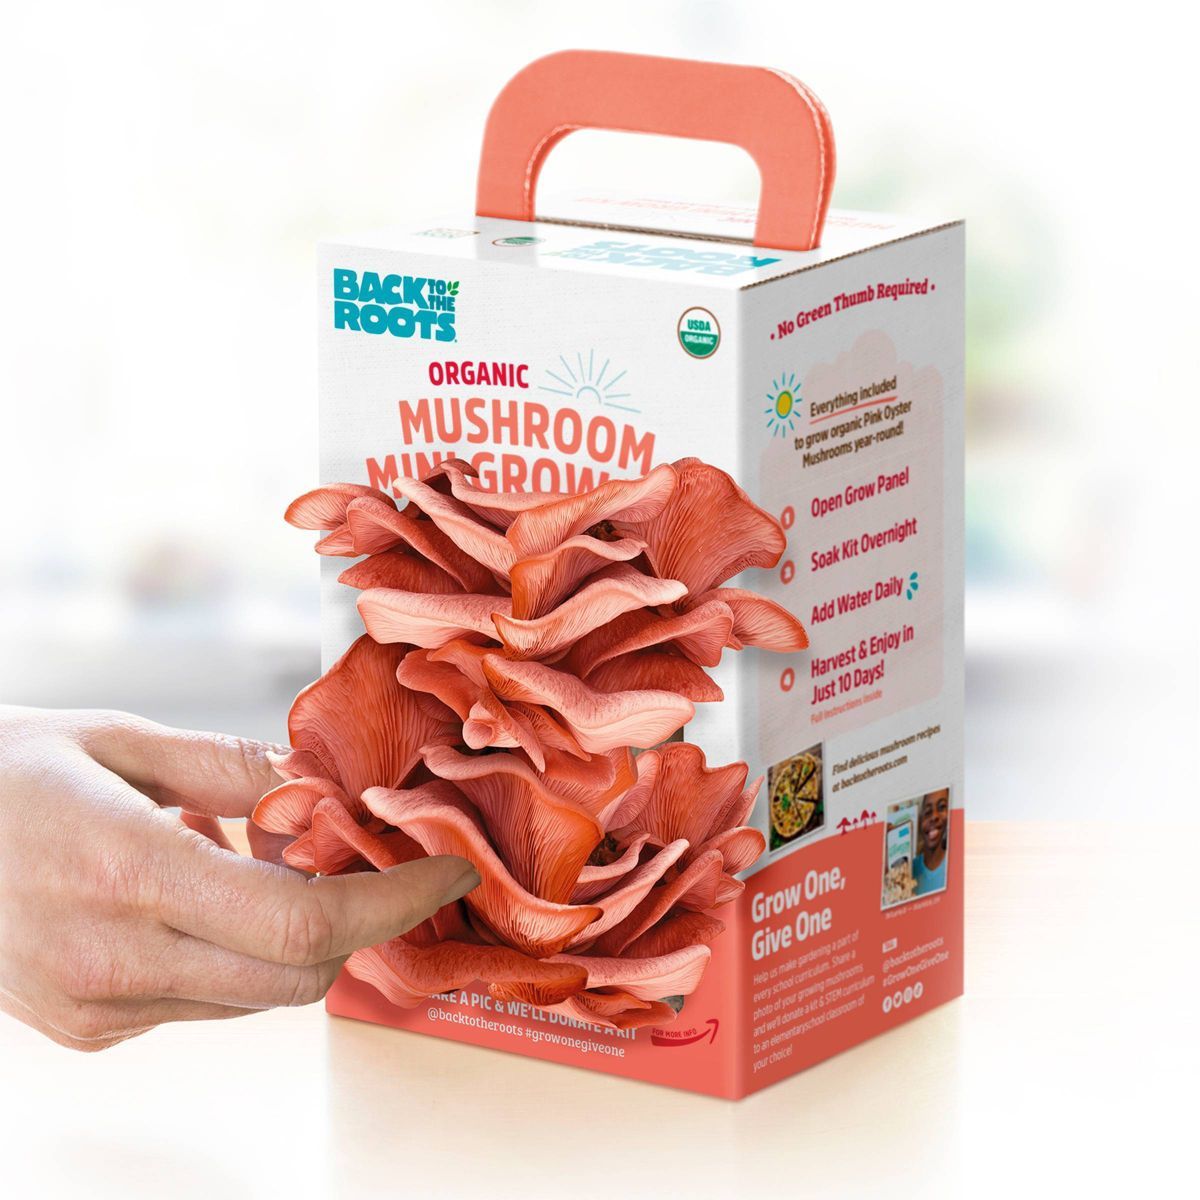 Back to the Roots Organic Mushroom Mini Grow Kit Pink Oyster | Target